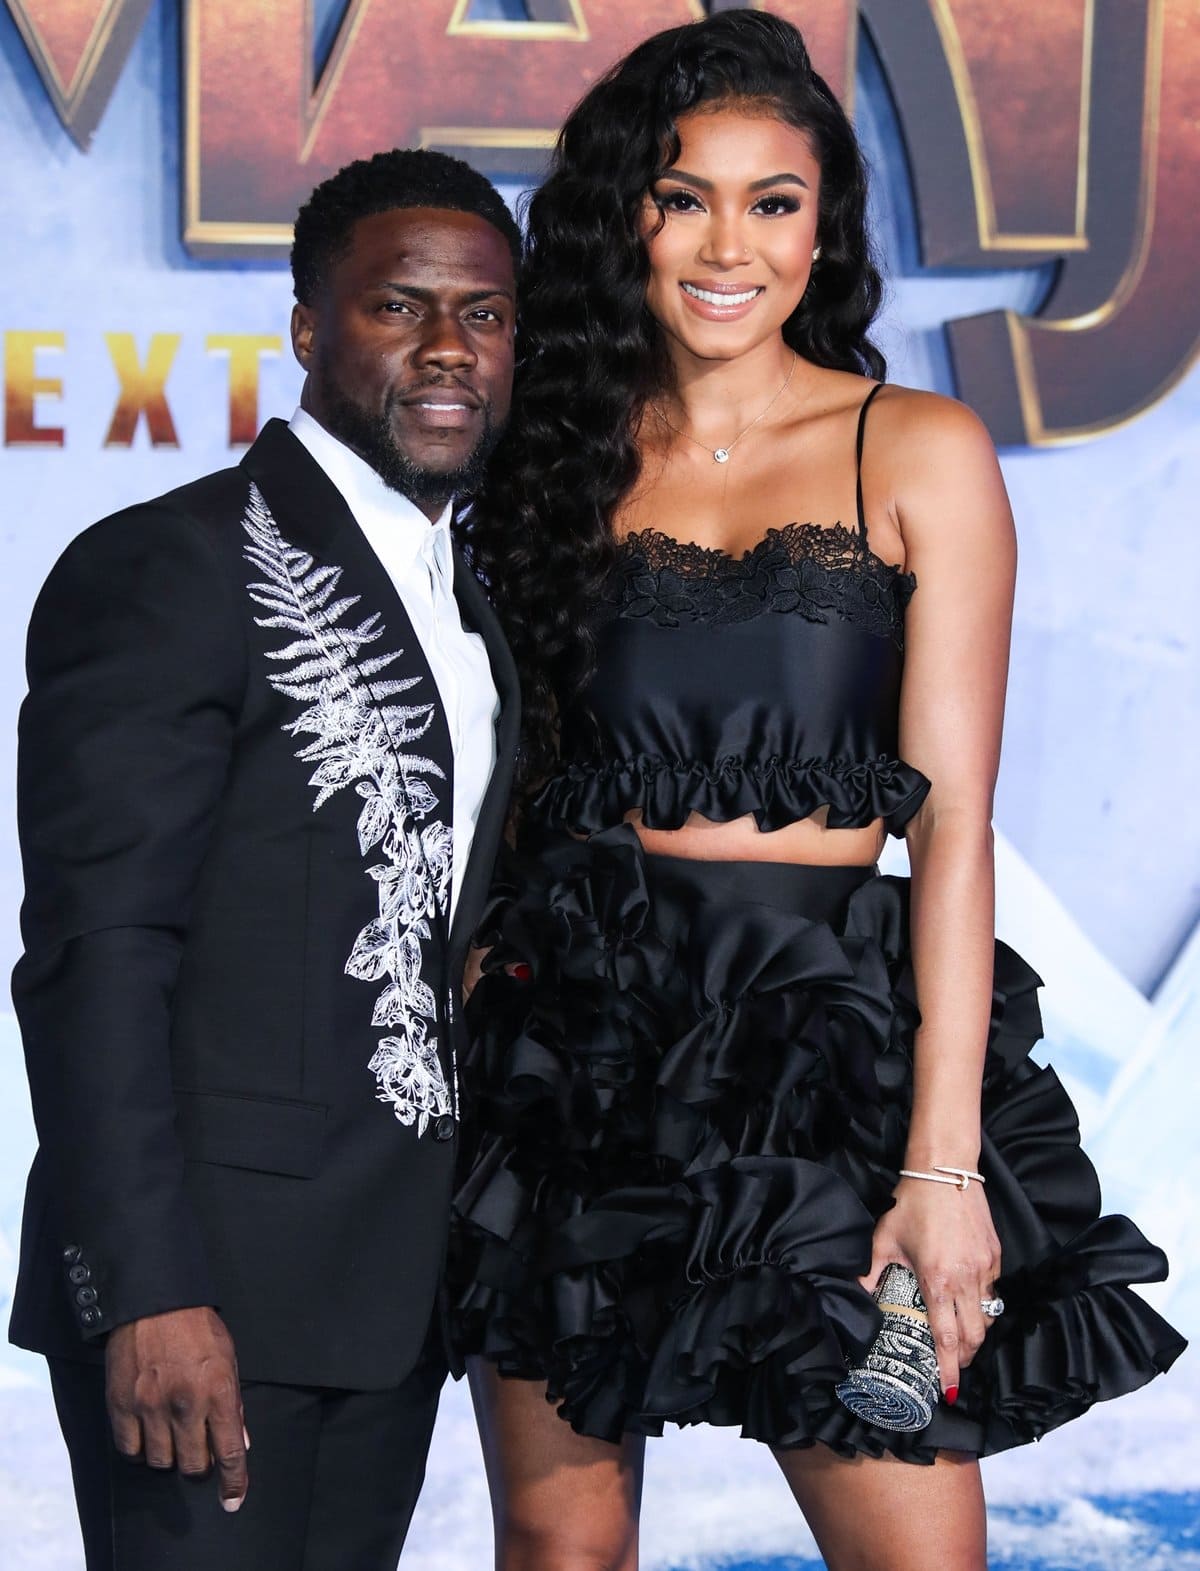 Kevin Hart and his much taller wife, Eniko Parrish, who reportedly is 5′7″ without heels